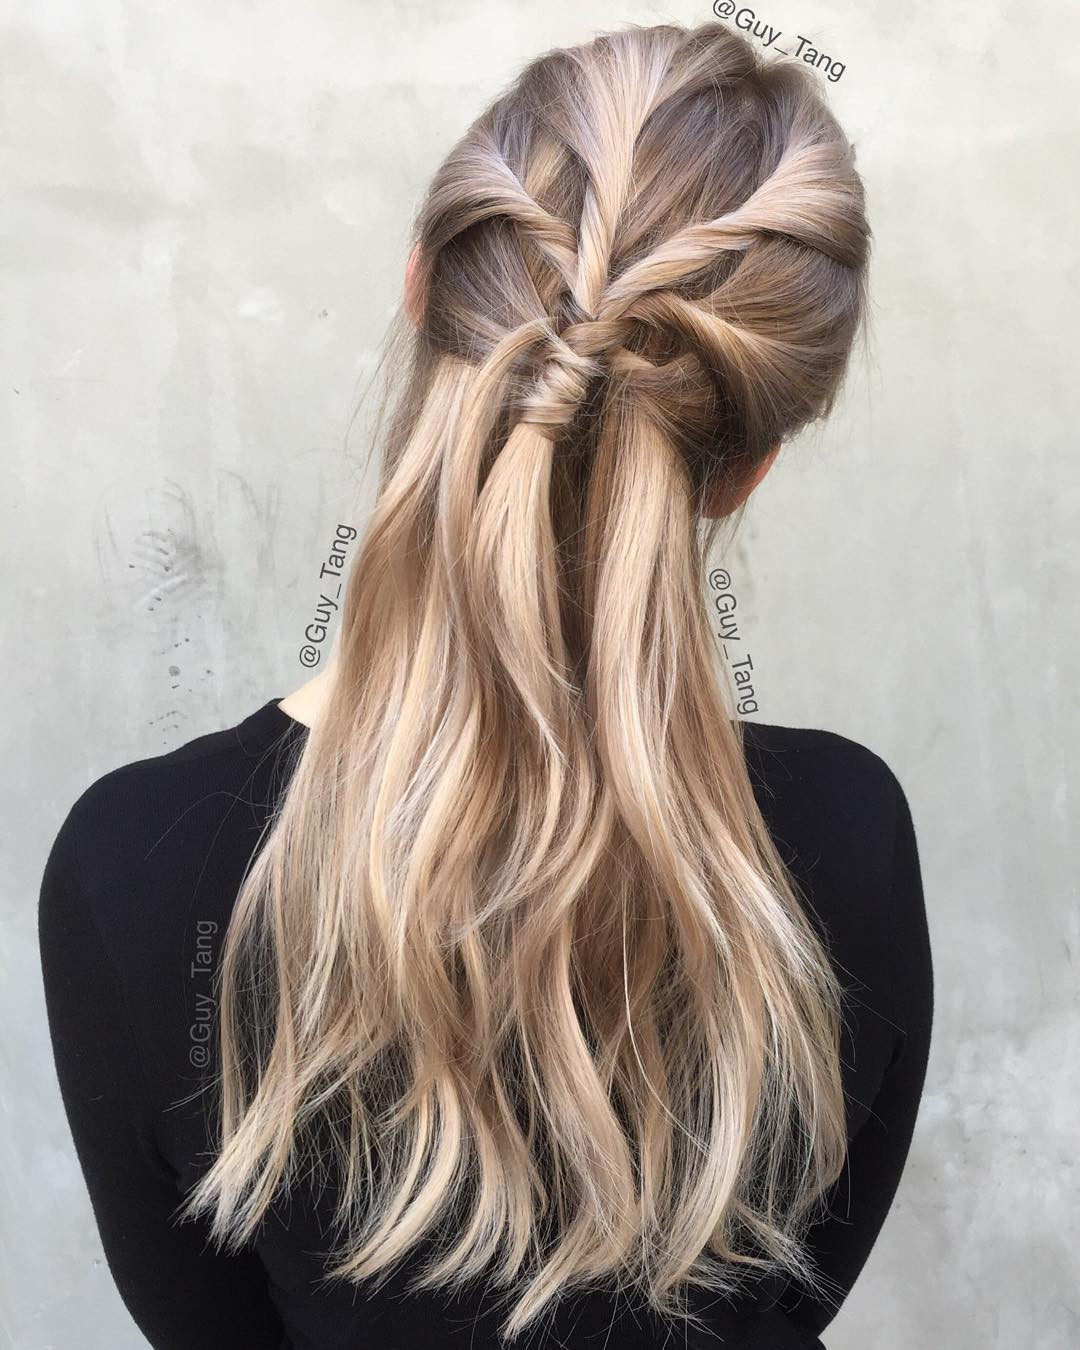 Half Updo Long Hairstyles
 20 Long Hairstyles You Will Want to Rock Immediately